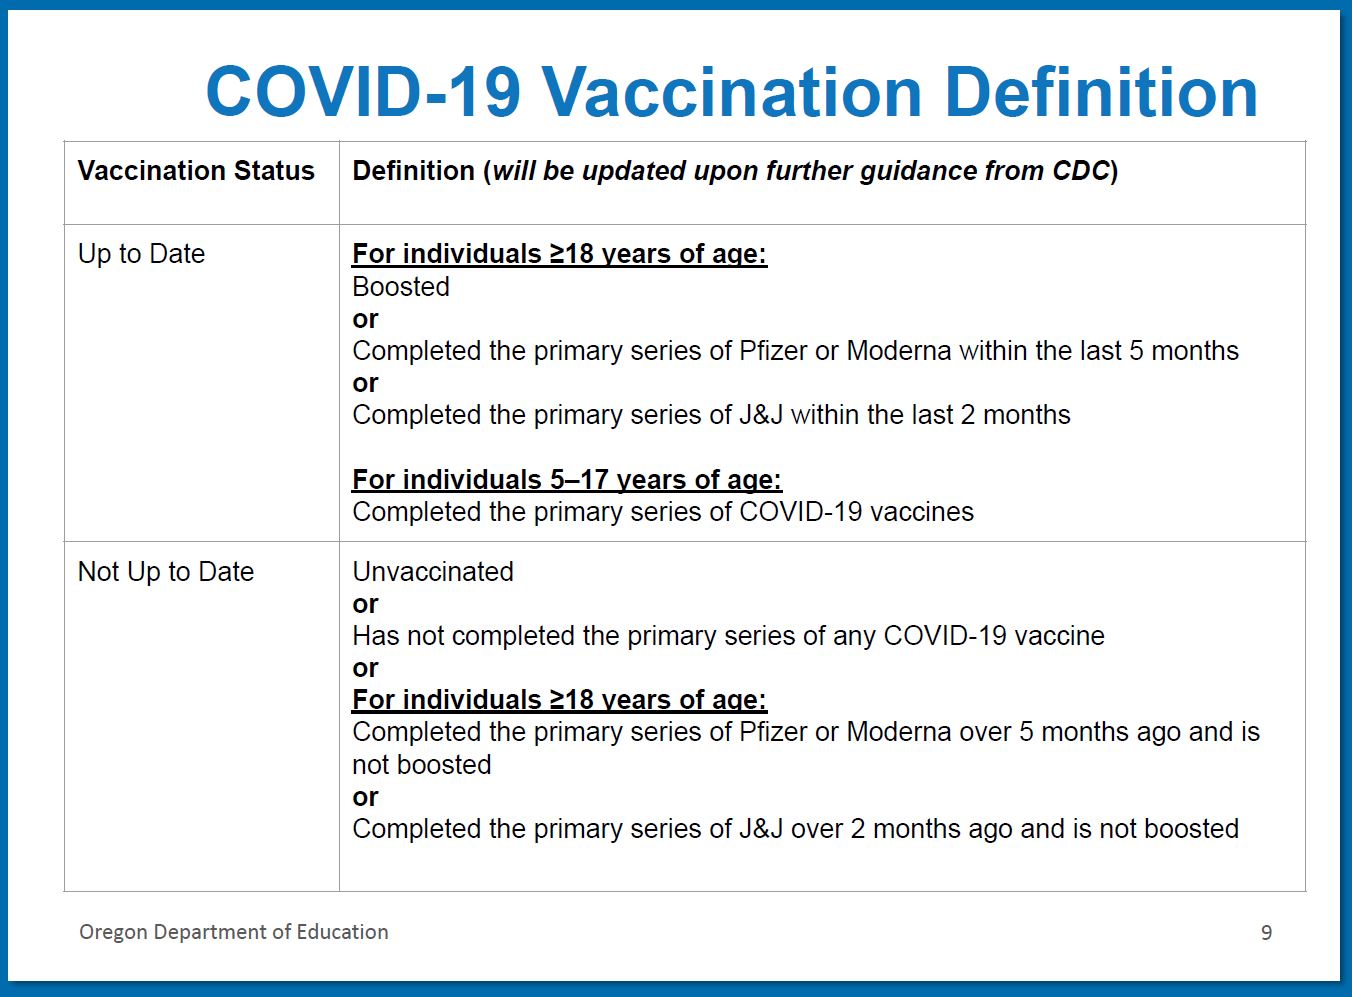 Up to Date Vaccination definition table